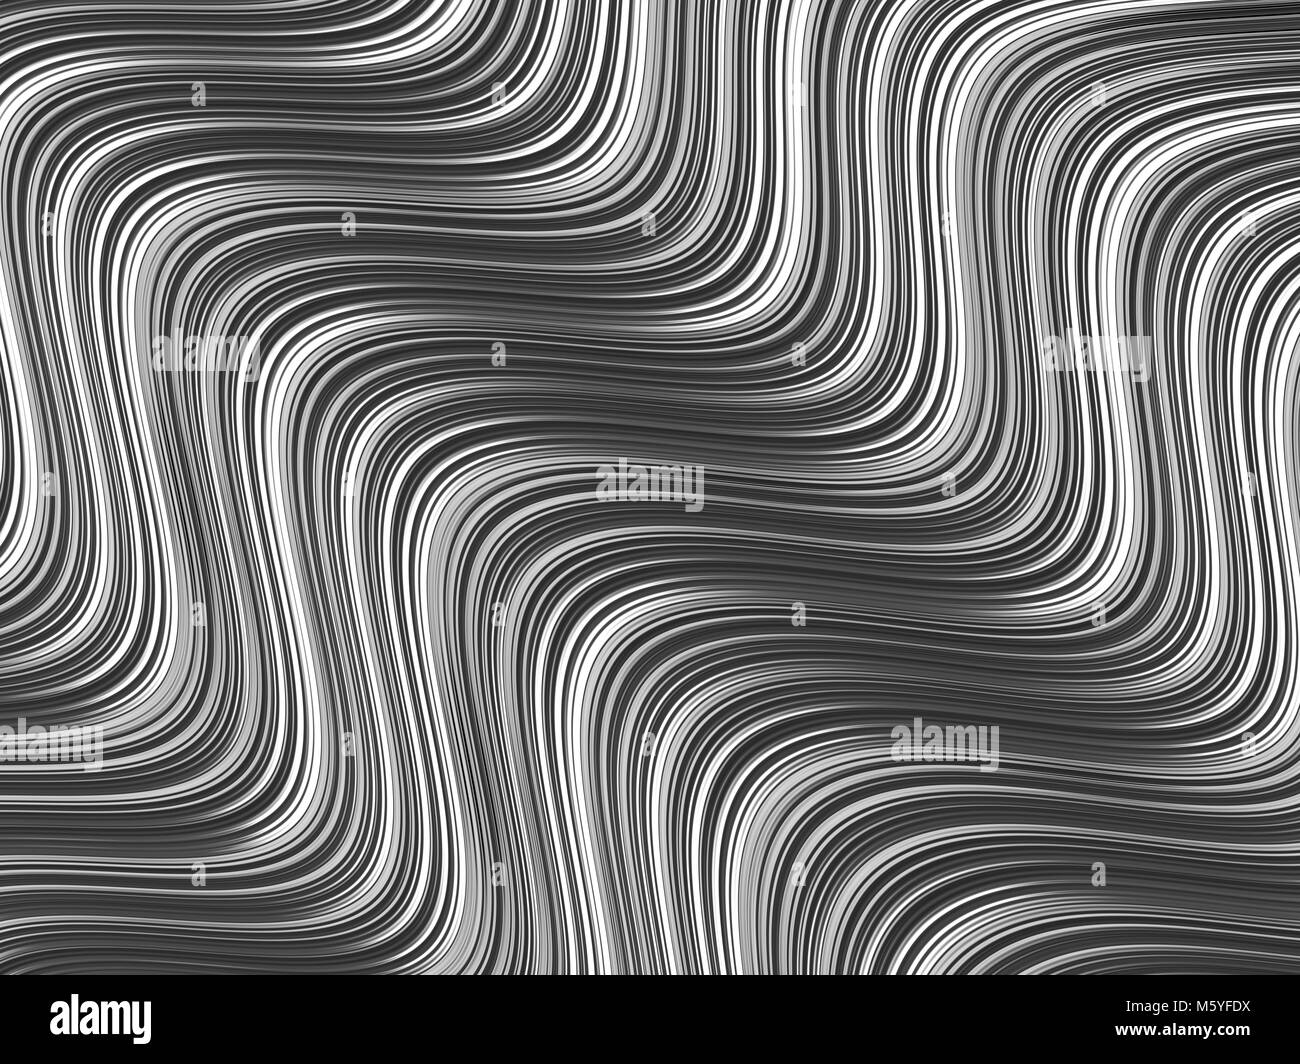 grey wavy textured fractal abstract background design Stock Photo